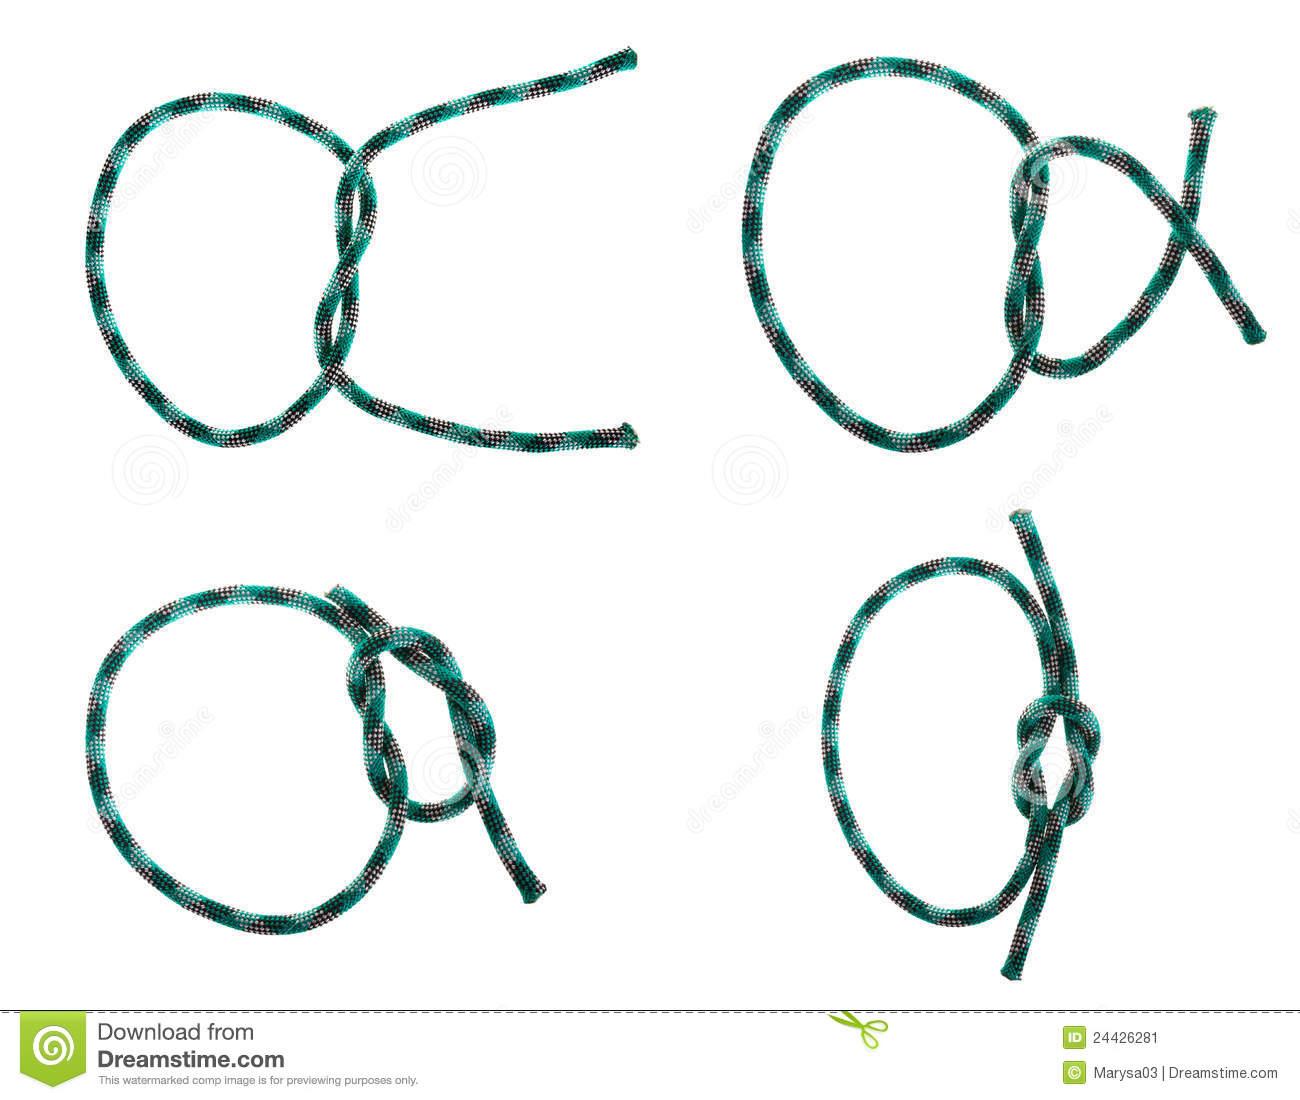 Reef Knot Or Square Knot